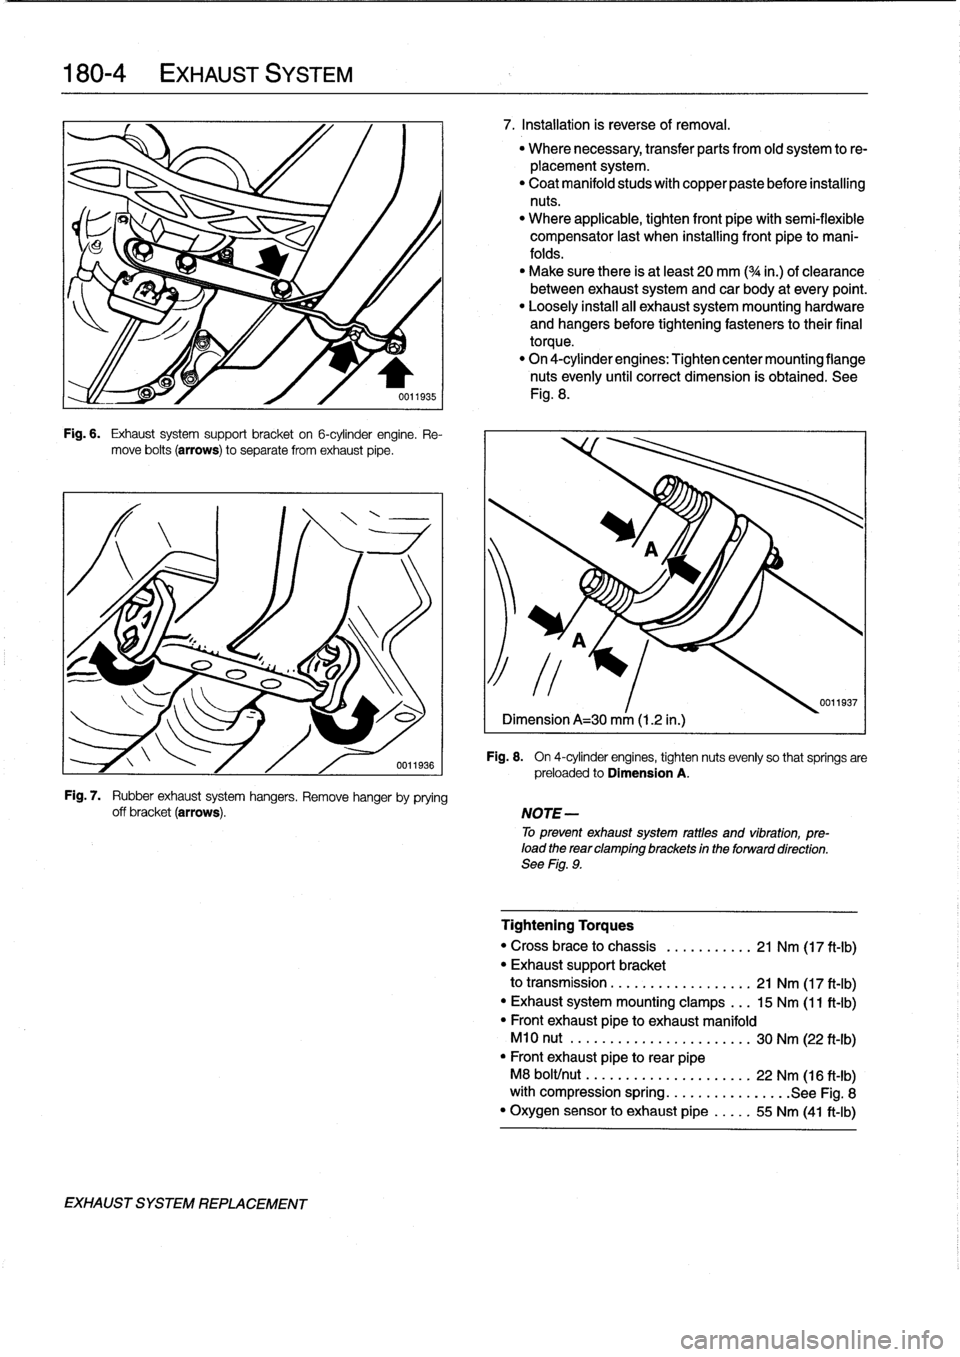 BMW 328i 1997 E36 Workshop Manual 
180-
4

	

EXHAUST
SYSTEM

Fig
.
6
.

	

Exhaust
system
support
bracket
on
6-cylinder
engine
.
Re-
move
bolts
(arrows)
to
separate
from
exhaust
pipe
.

Fig
.
7
.

	

Rubber
exhaust
system
hangers
.
R